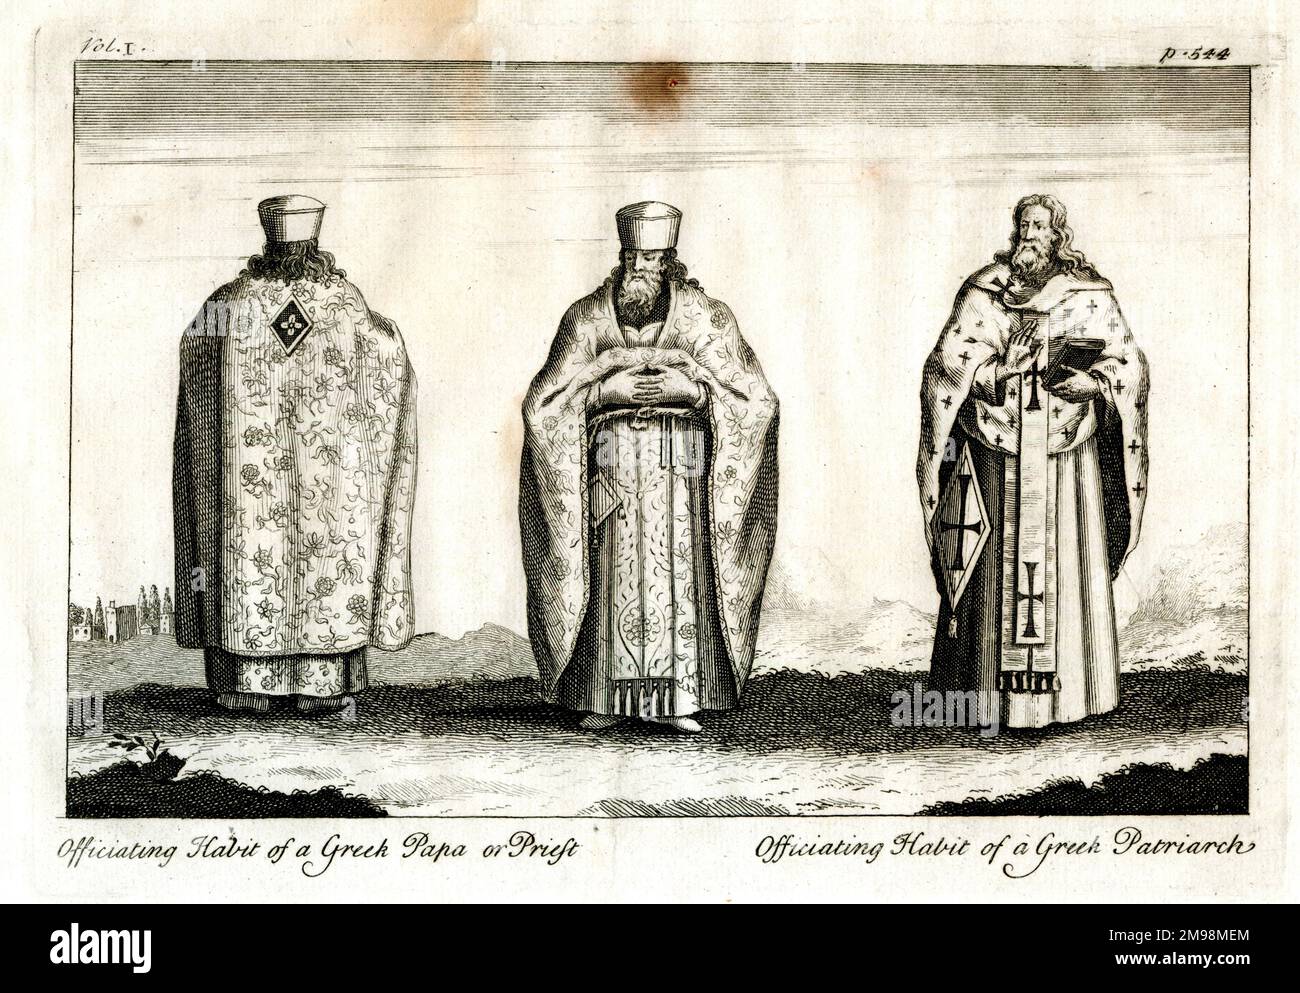 Officiating Habit of a Greek Papa or Priest (left and centre), and of a Patriarch (right). Stock Photo